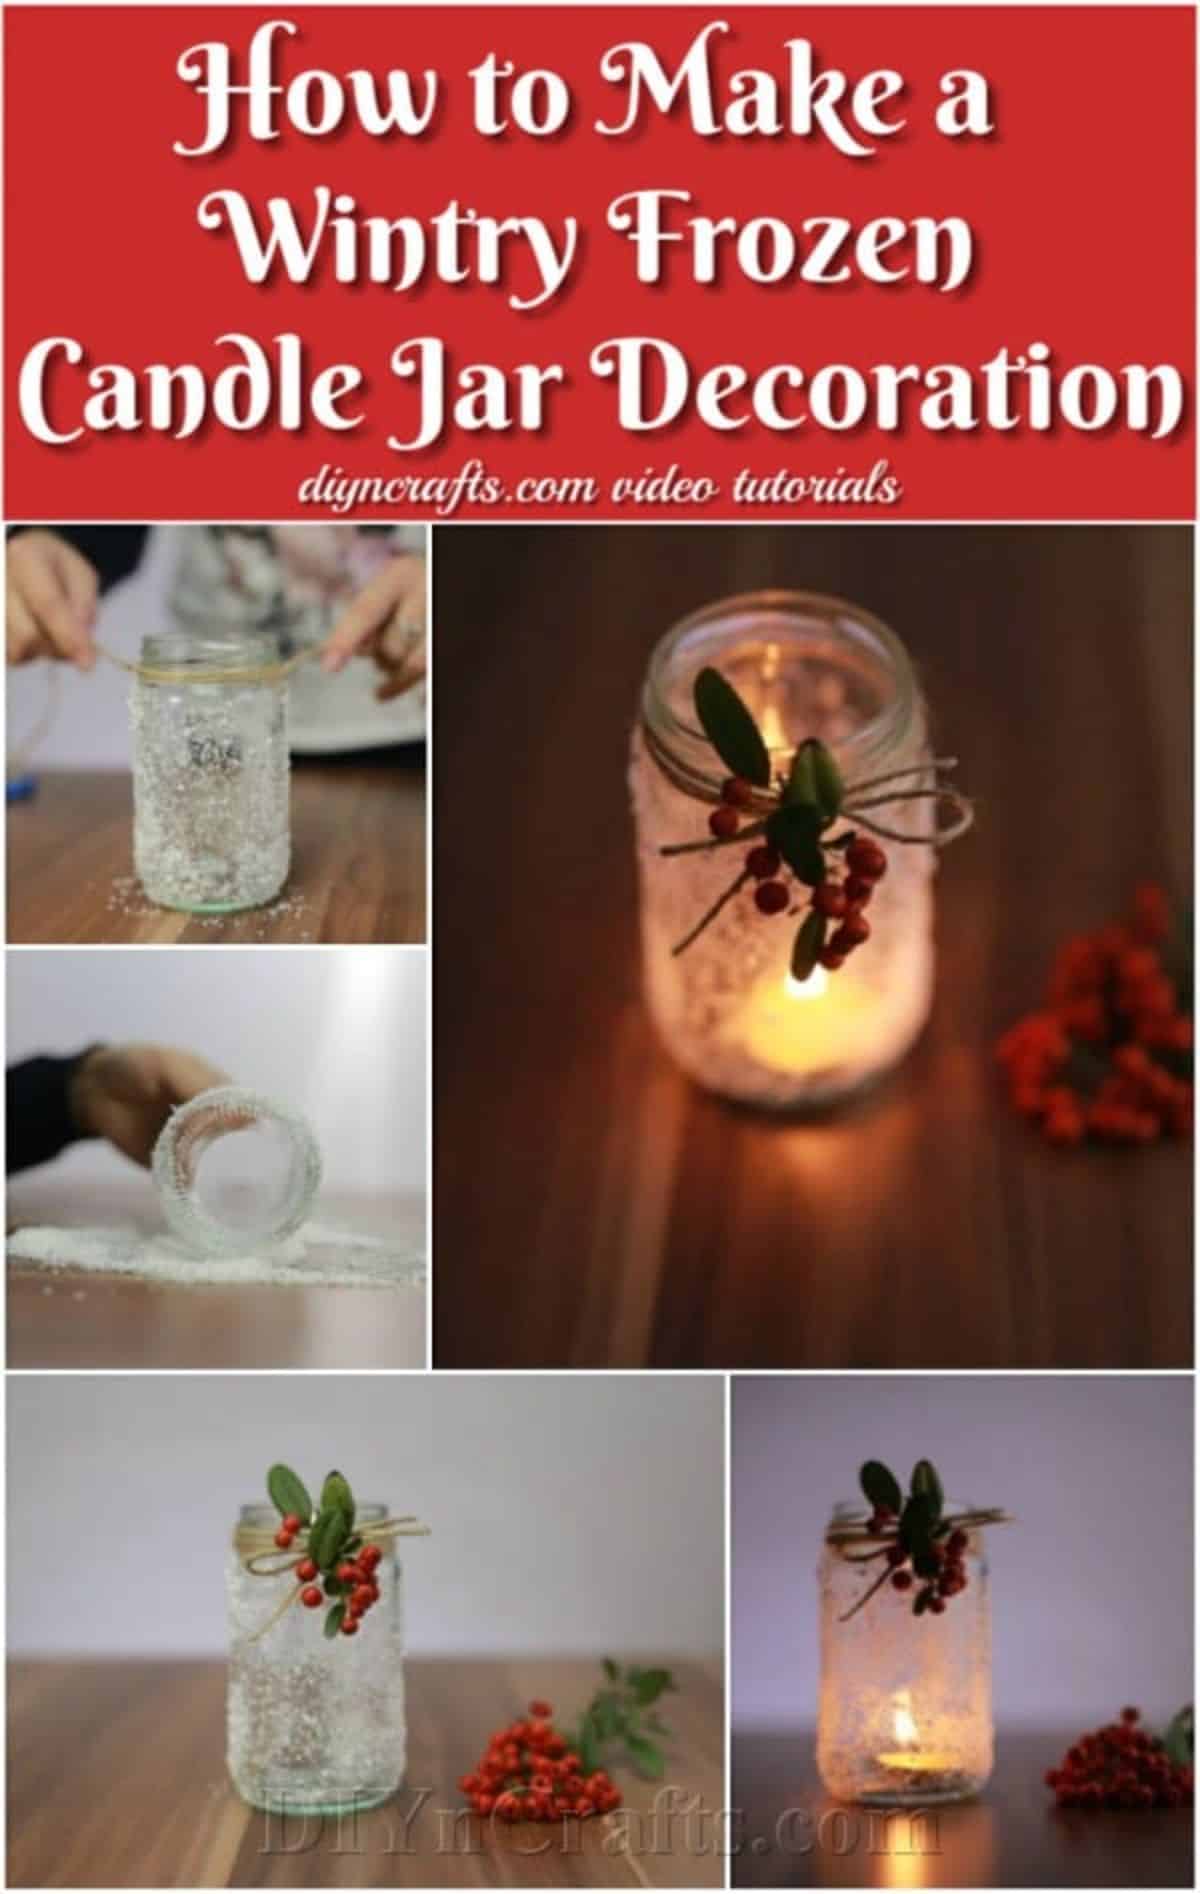 How to Make a Wintry Frozen Candle Jar Decoration